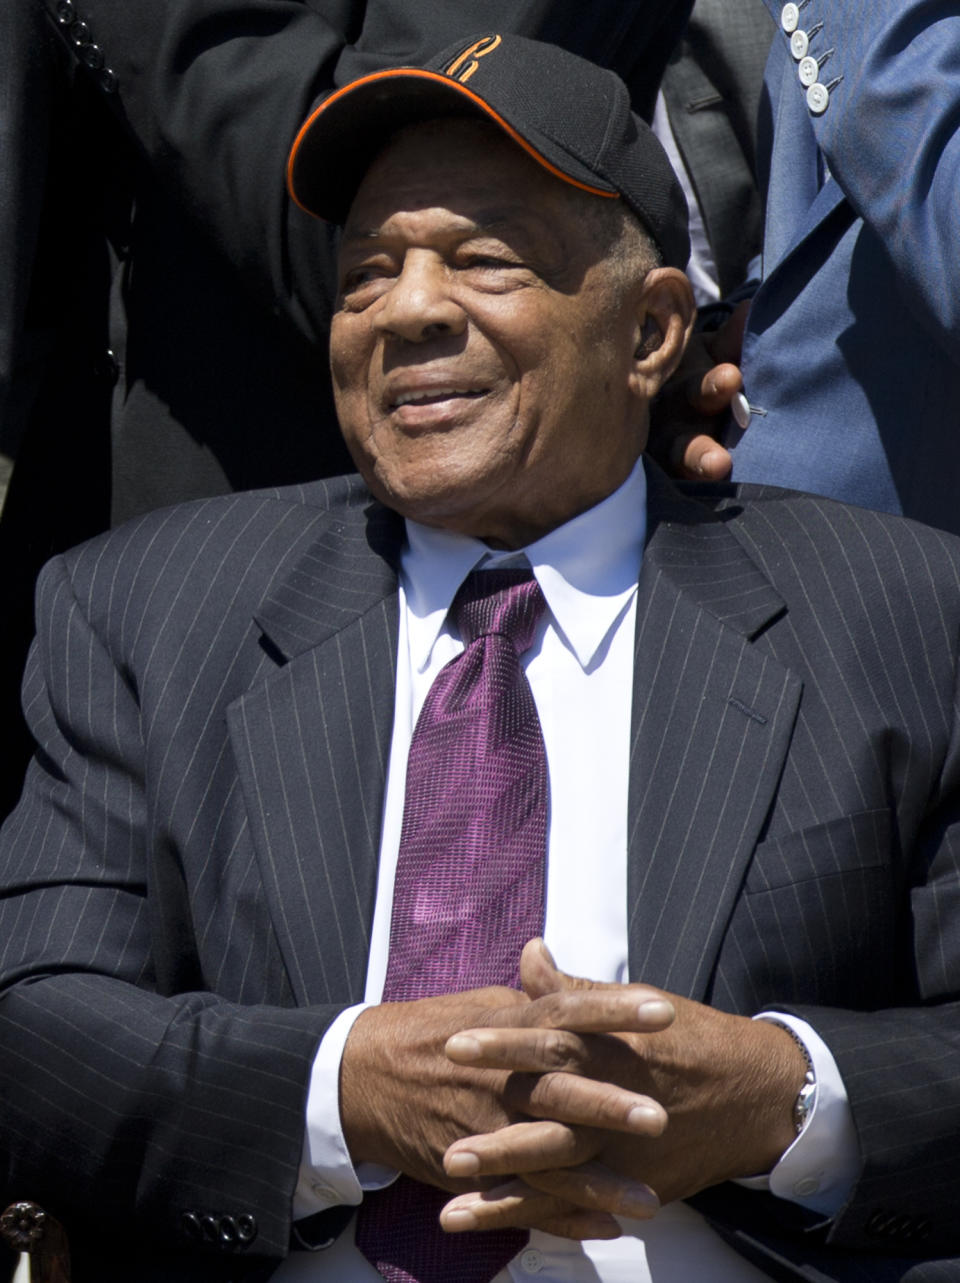 FILE - Willie Mays, who spent the majority of his career as a center fielder with the New York and San Francisco Giants, smiles as President Barack Obama honors the 2012 World Series Champion San Francisco Giants baseball team, July 29, 2013, in Washington. Mays, the electrifying “Say Hey Kid” whose singular combination of talent, drive and exuberance made him one of baseball’s greatest and most beloved players, has died. He was 93. Mays' family and the San Francisco Giants jointly announced Tuesday night, June 18, 2024, he had “passed away peacefully” Tuesday afternoon surrounded by loved ones. (AP Photo/Carolyn Kaster, File)